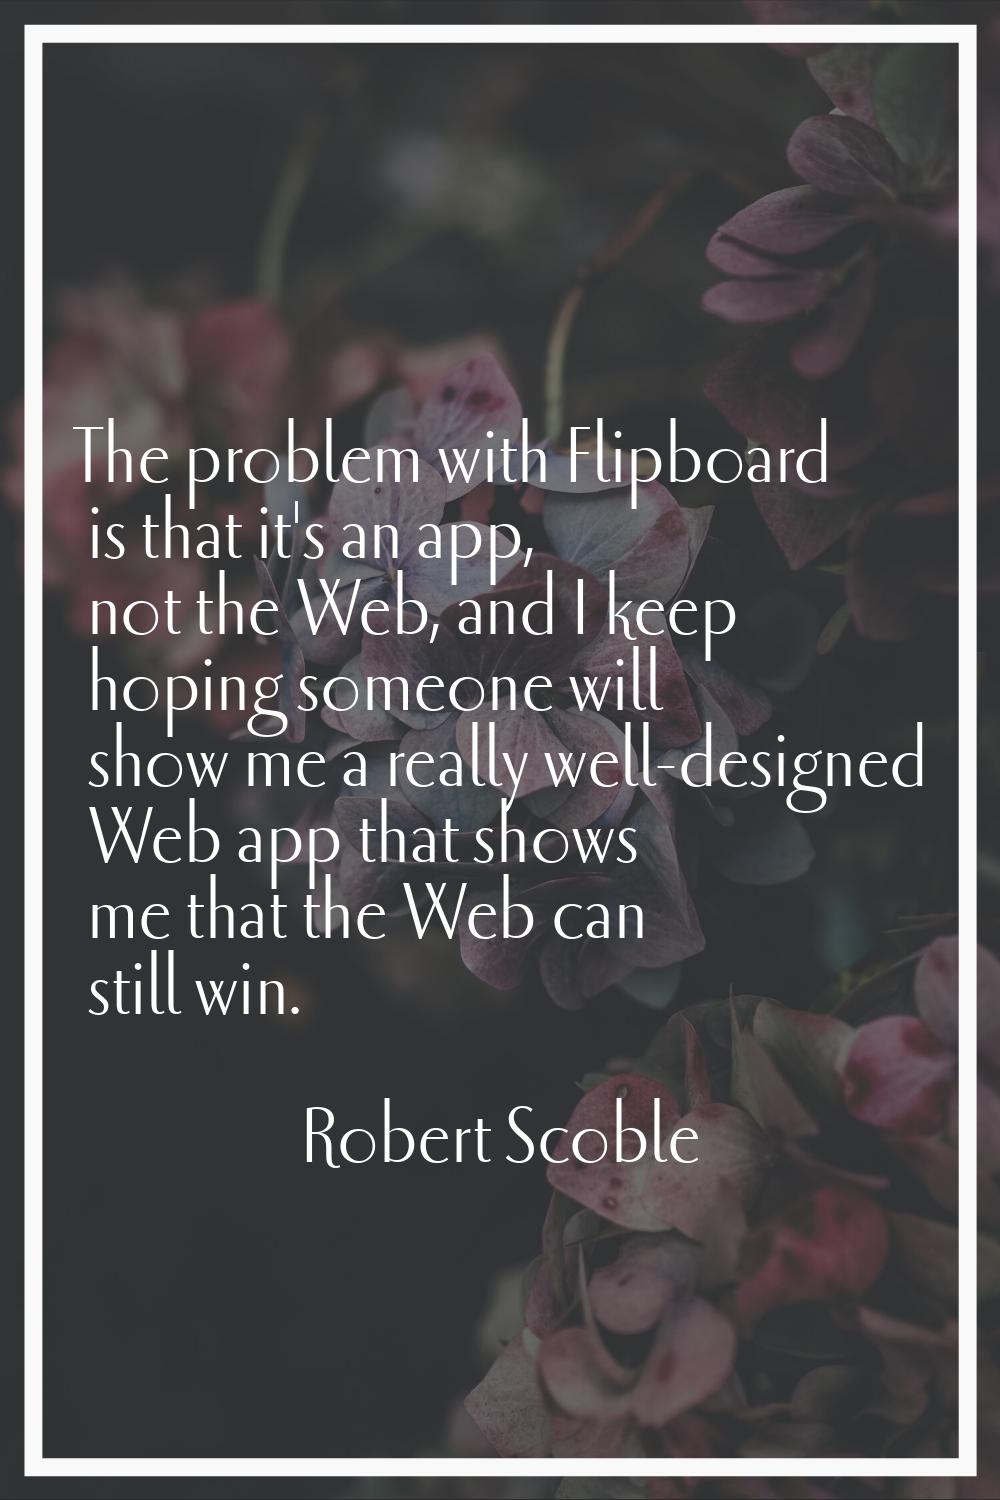 The problem with Flipboard is that it's an app, not the Web, and I keep hoping someone will show me